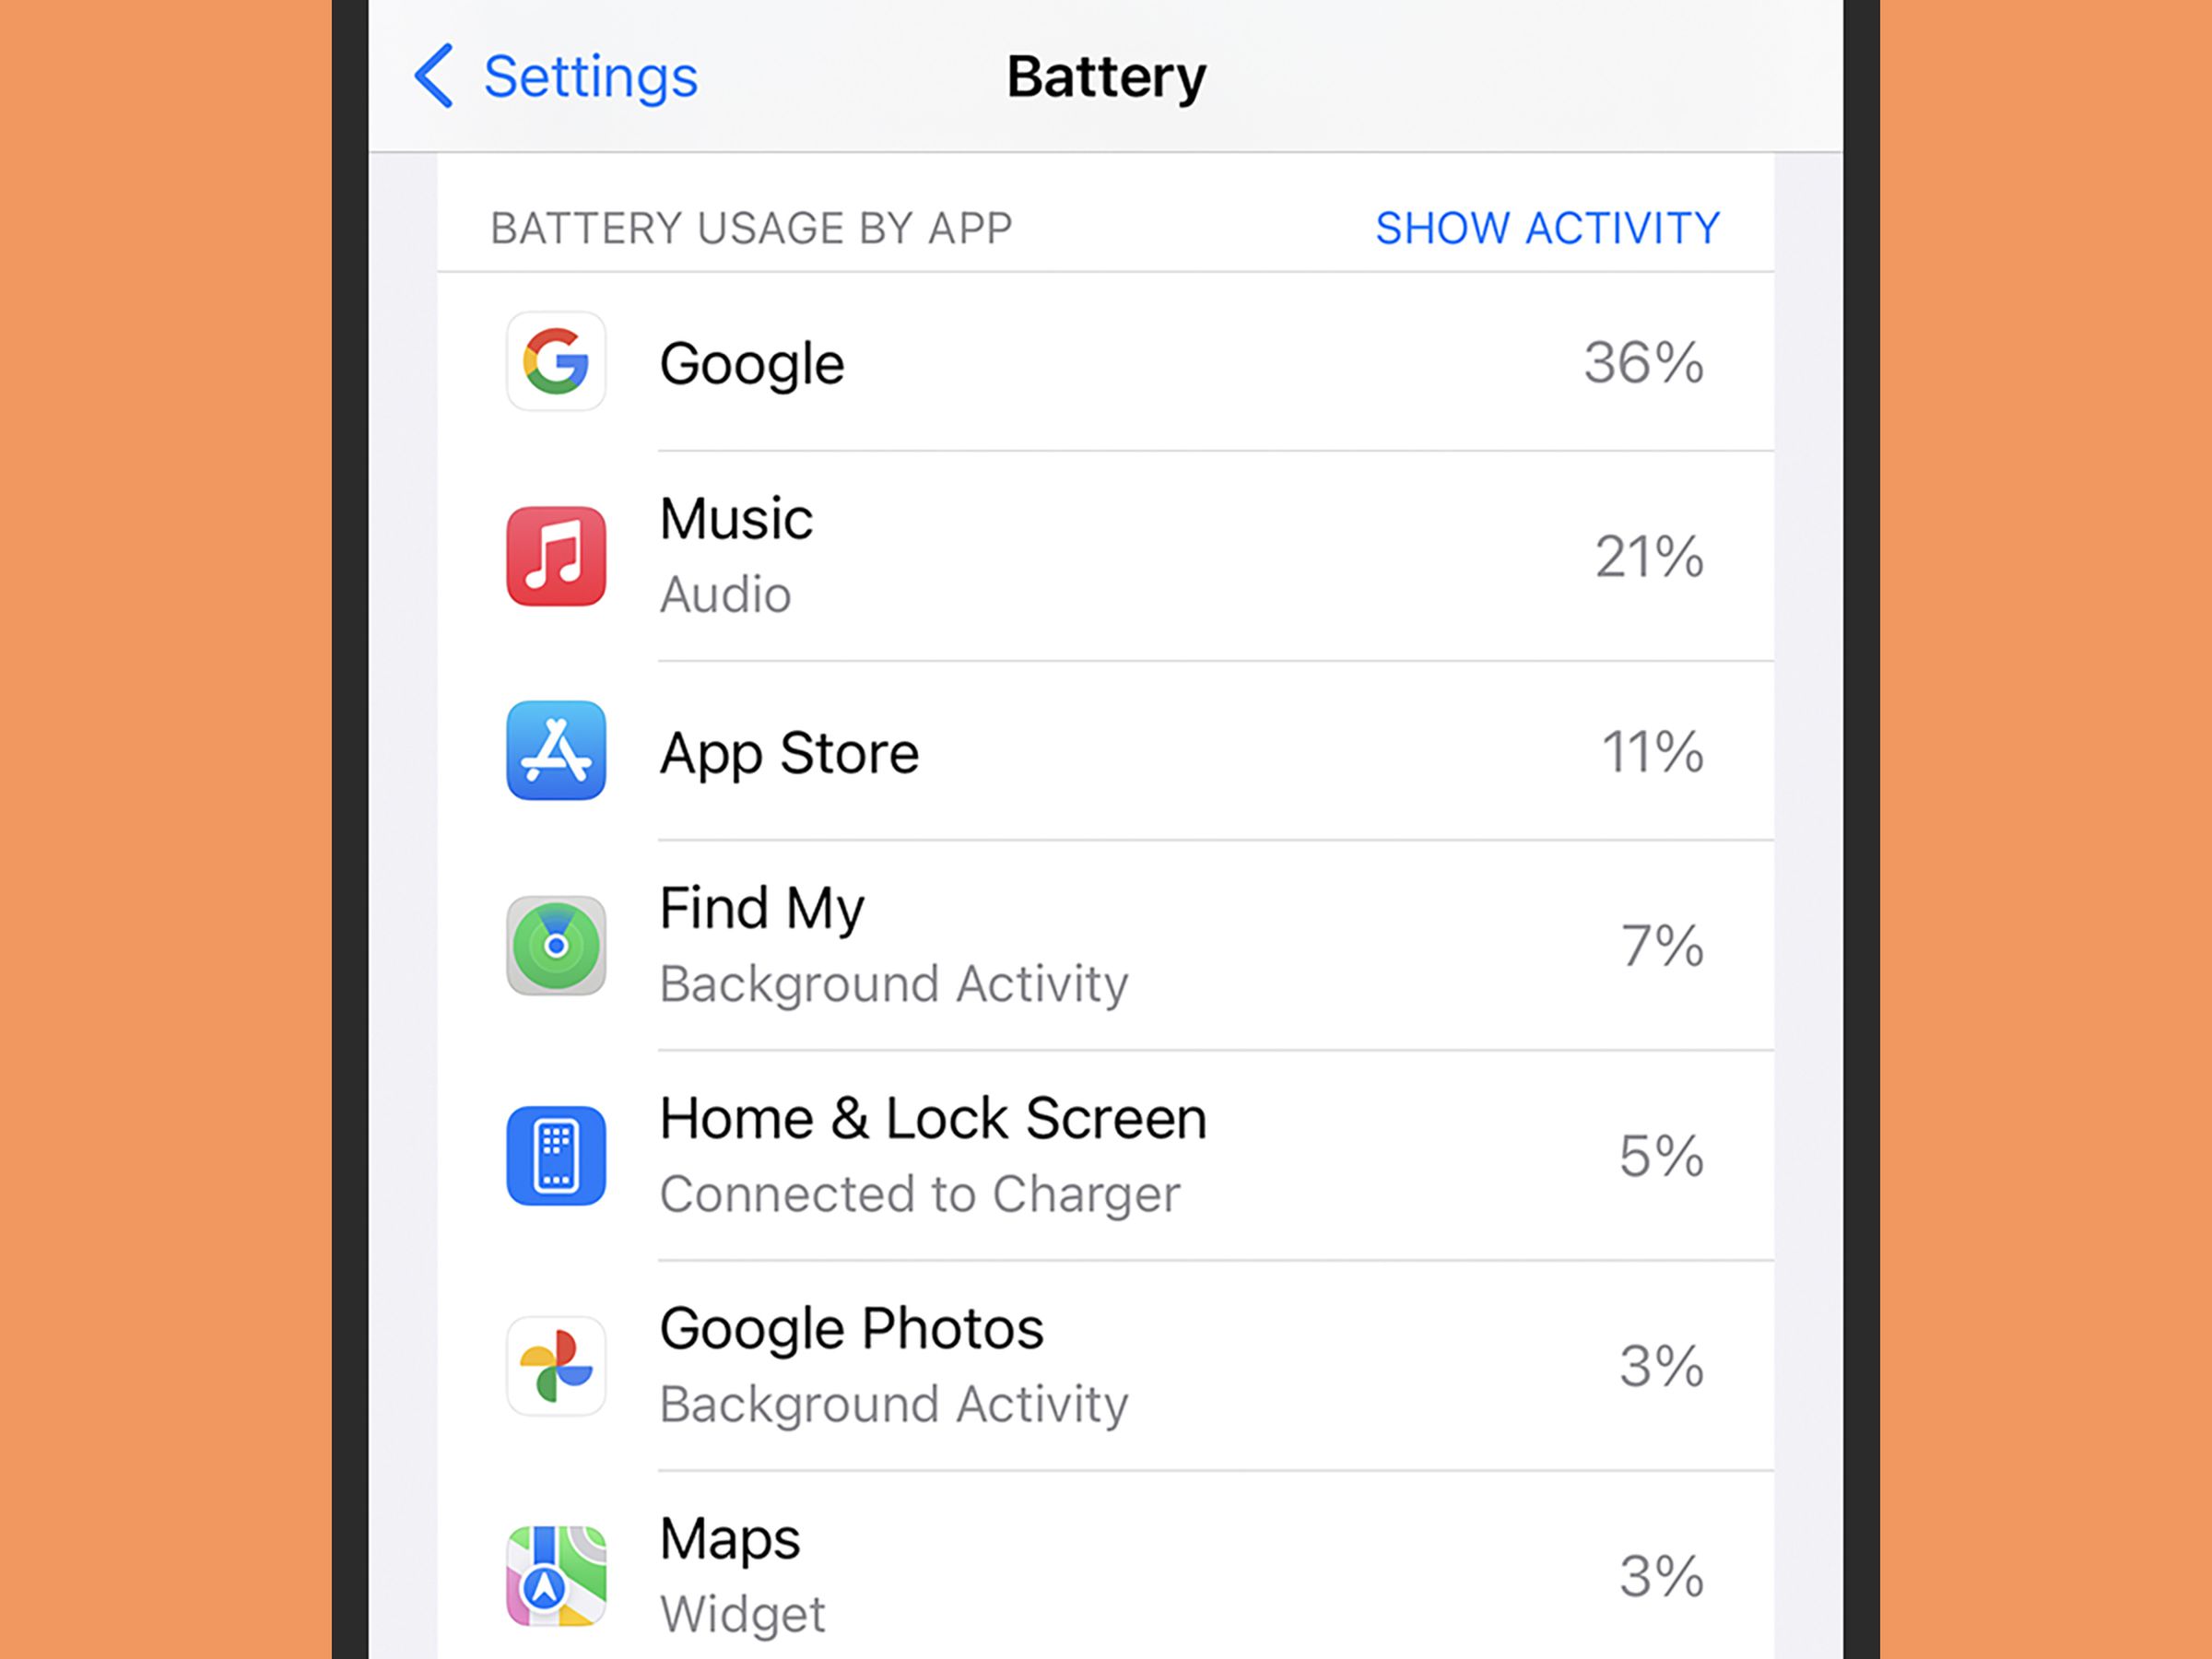 Battery page on iPhone listing battery usage by app on left, and percentages of activity on right.